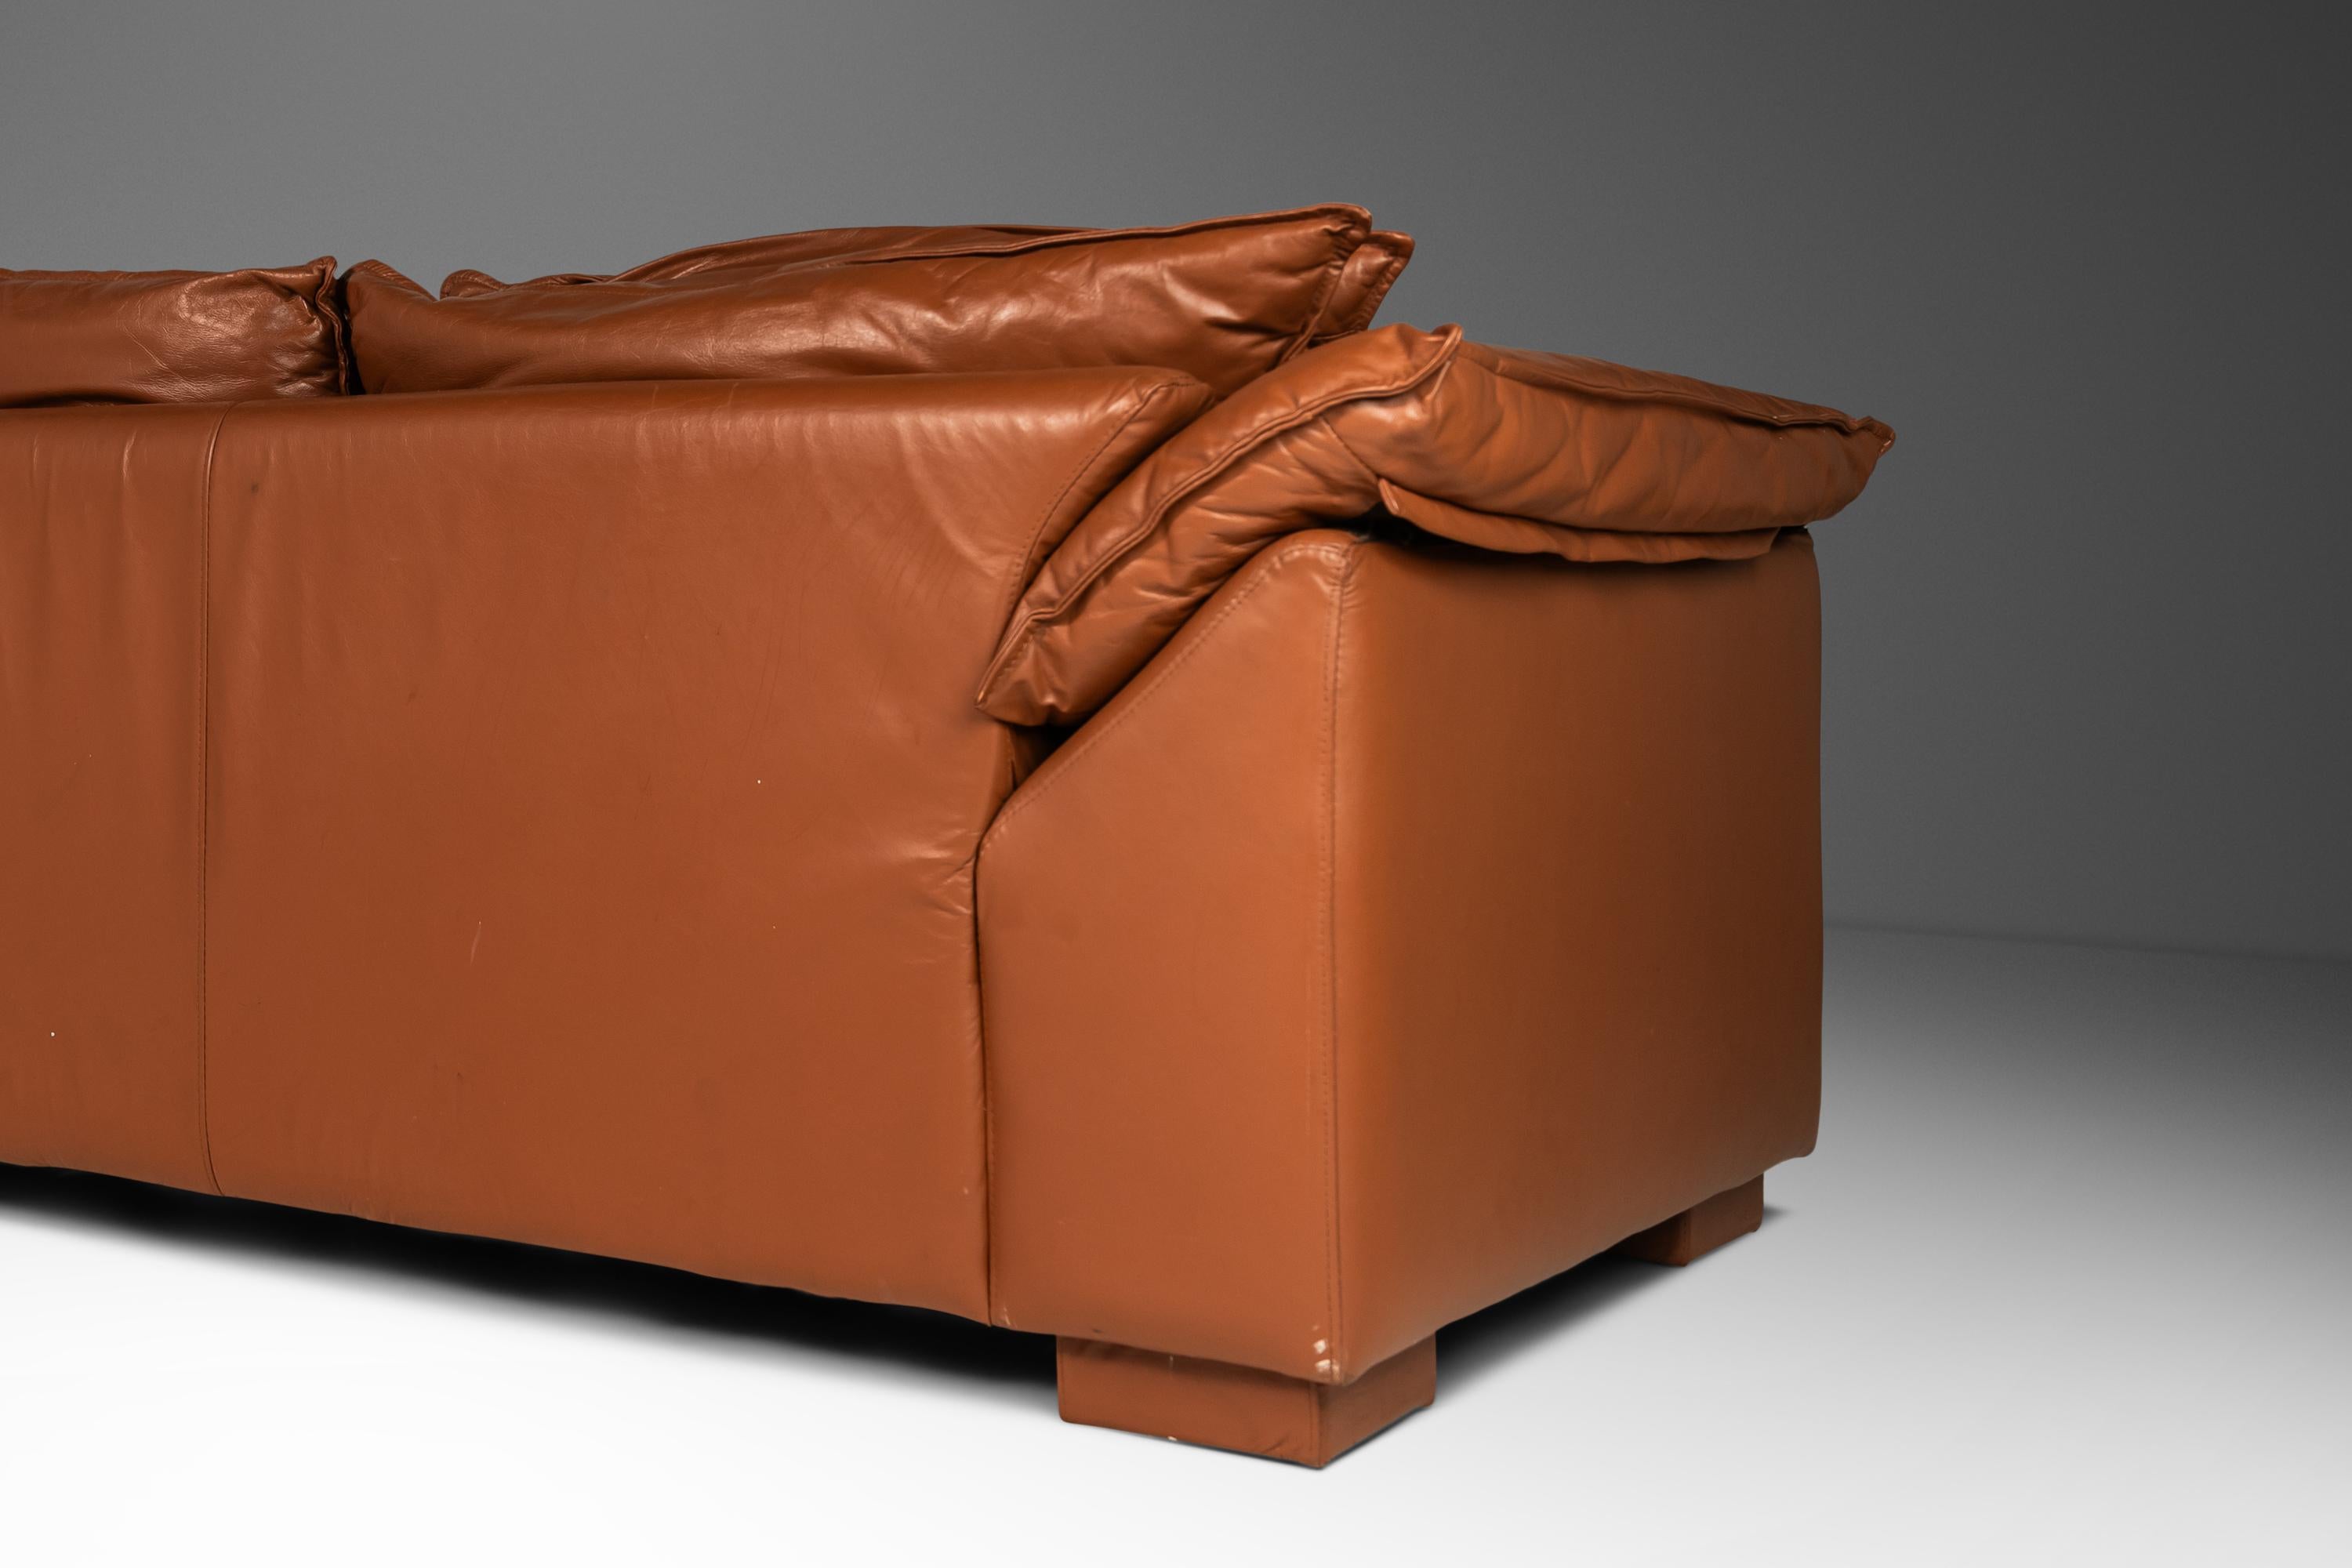 Low Profile Sofa in Cognac Brown Leather in the Manner of Niels Eilersen, 1980's For Sale 13